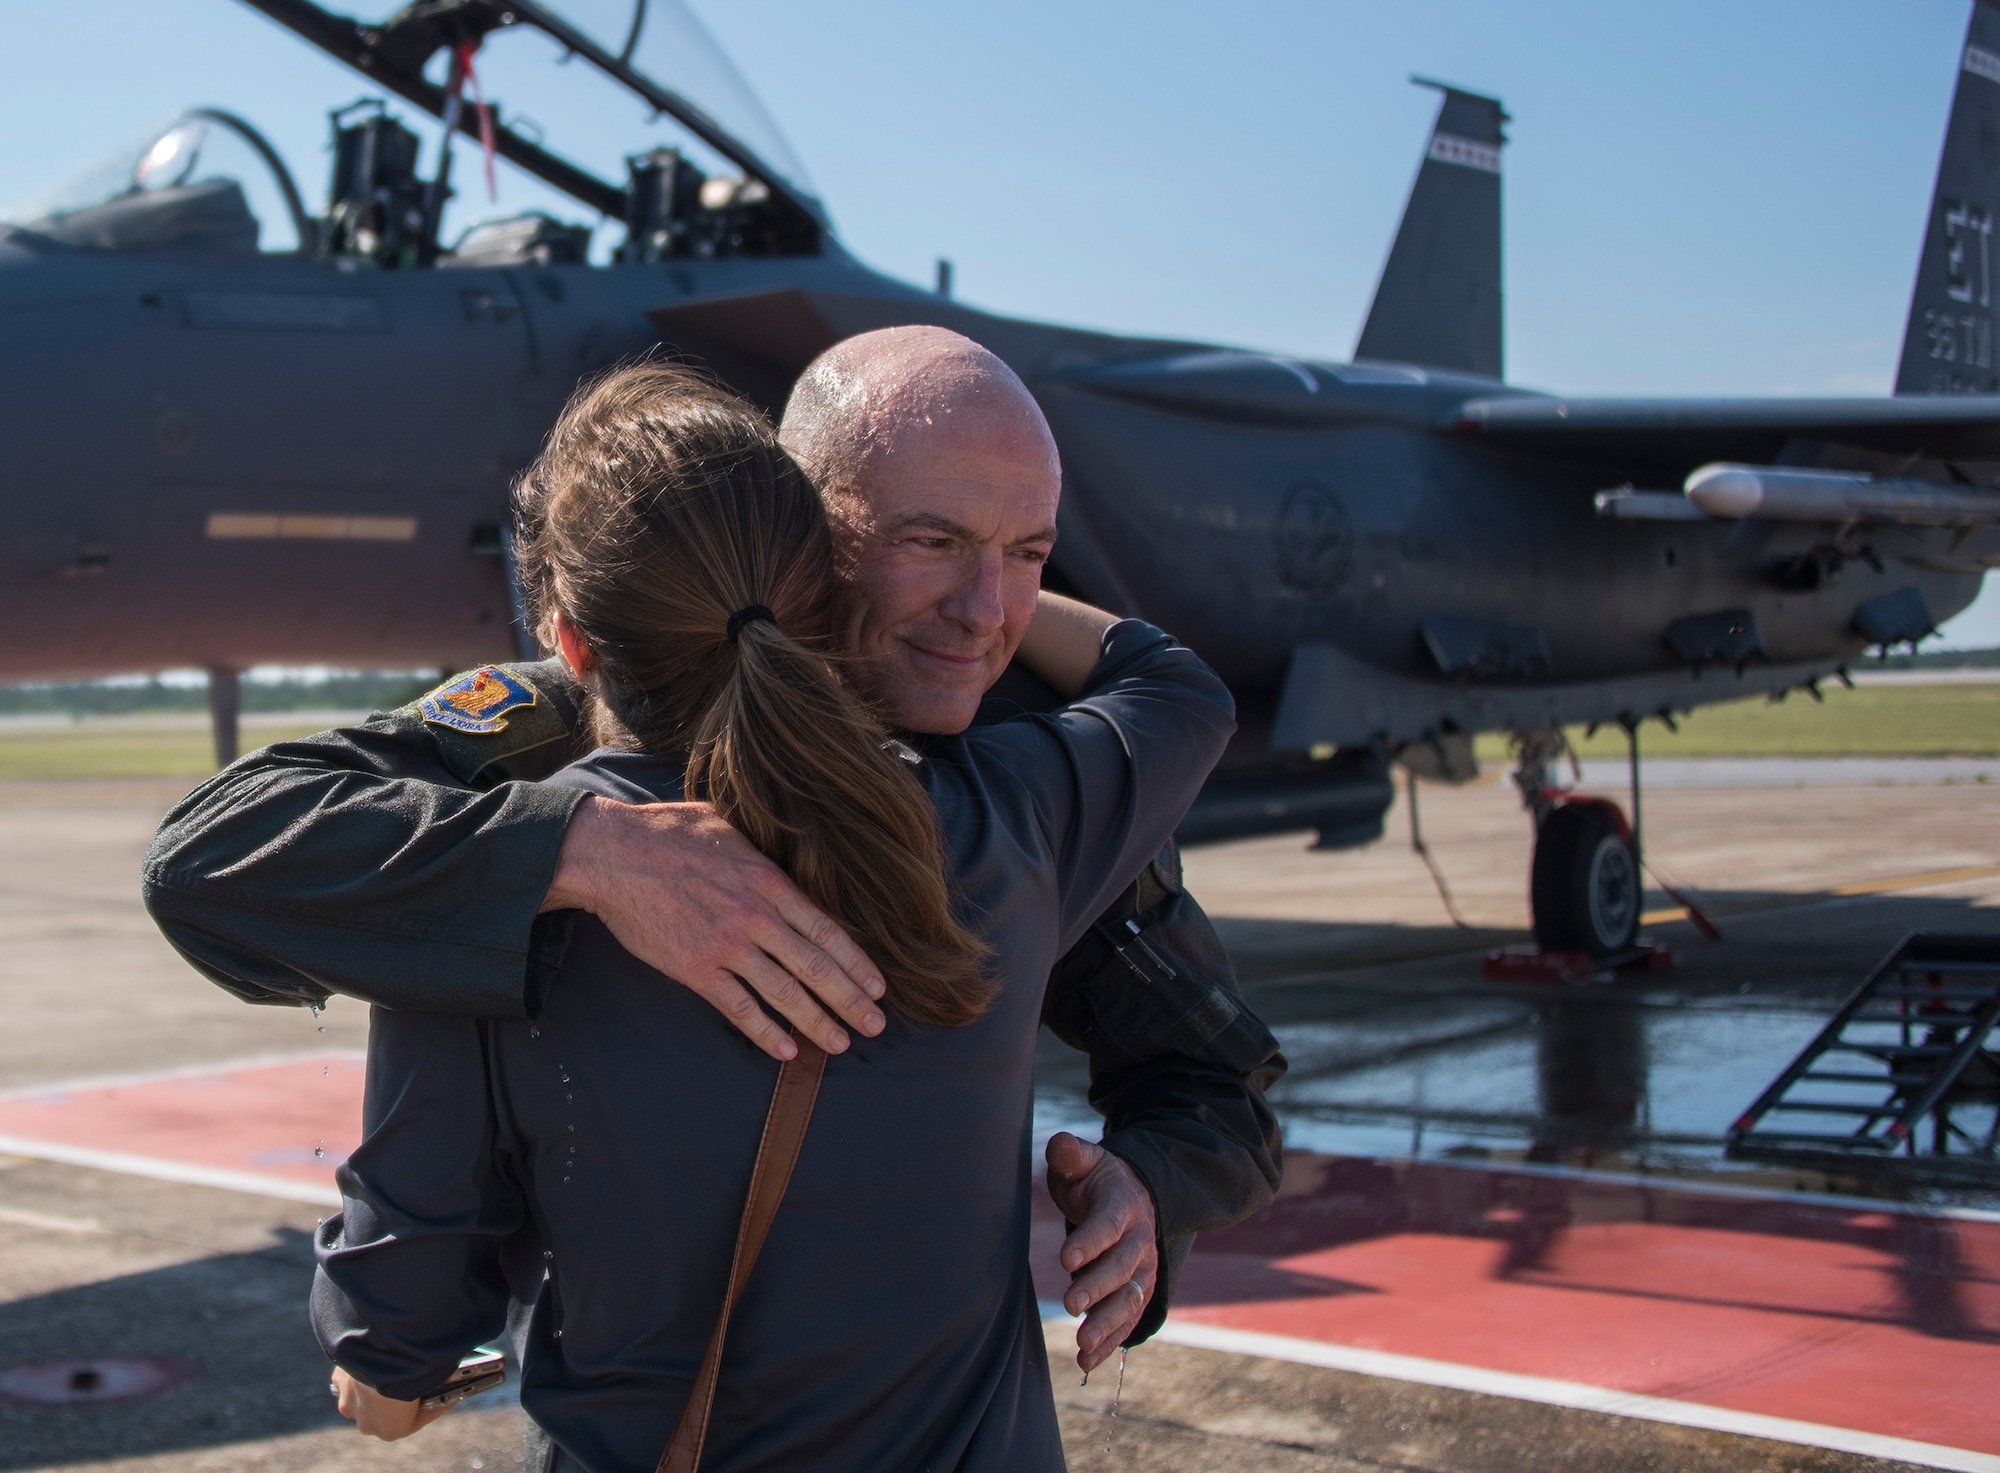 Brig. Gen. Christopher Azzano, 96th Test Wing commander, hugs his daughter, Ali, during his fini flight at Eglin Air Force Base, Fla. May 15. The fini flight is a symbol of a member’s final flight with the unit or base. Azzano’s new assignment will take him to Wright-Patterson Air Force Base in Ohio to take command of the Directorate of Air, Space and Cyberspace Operations. (U.S. Air Force photo/Ilka Cole) 